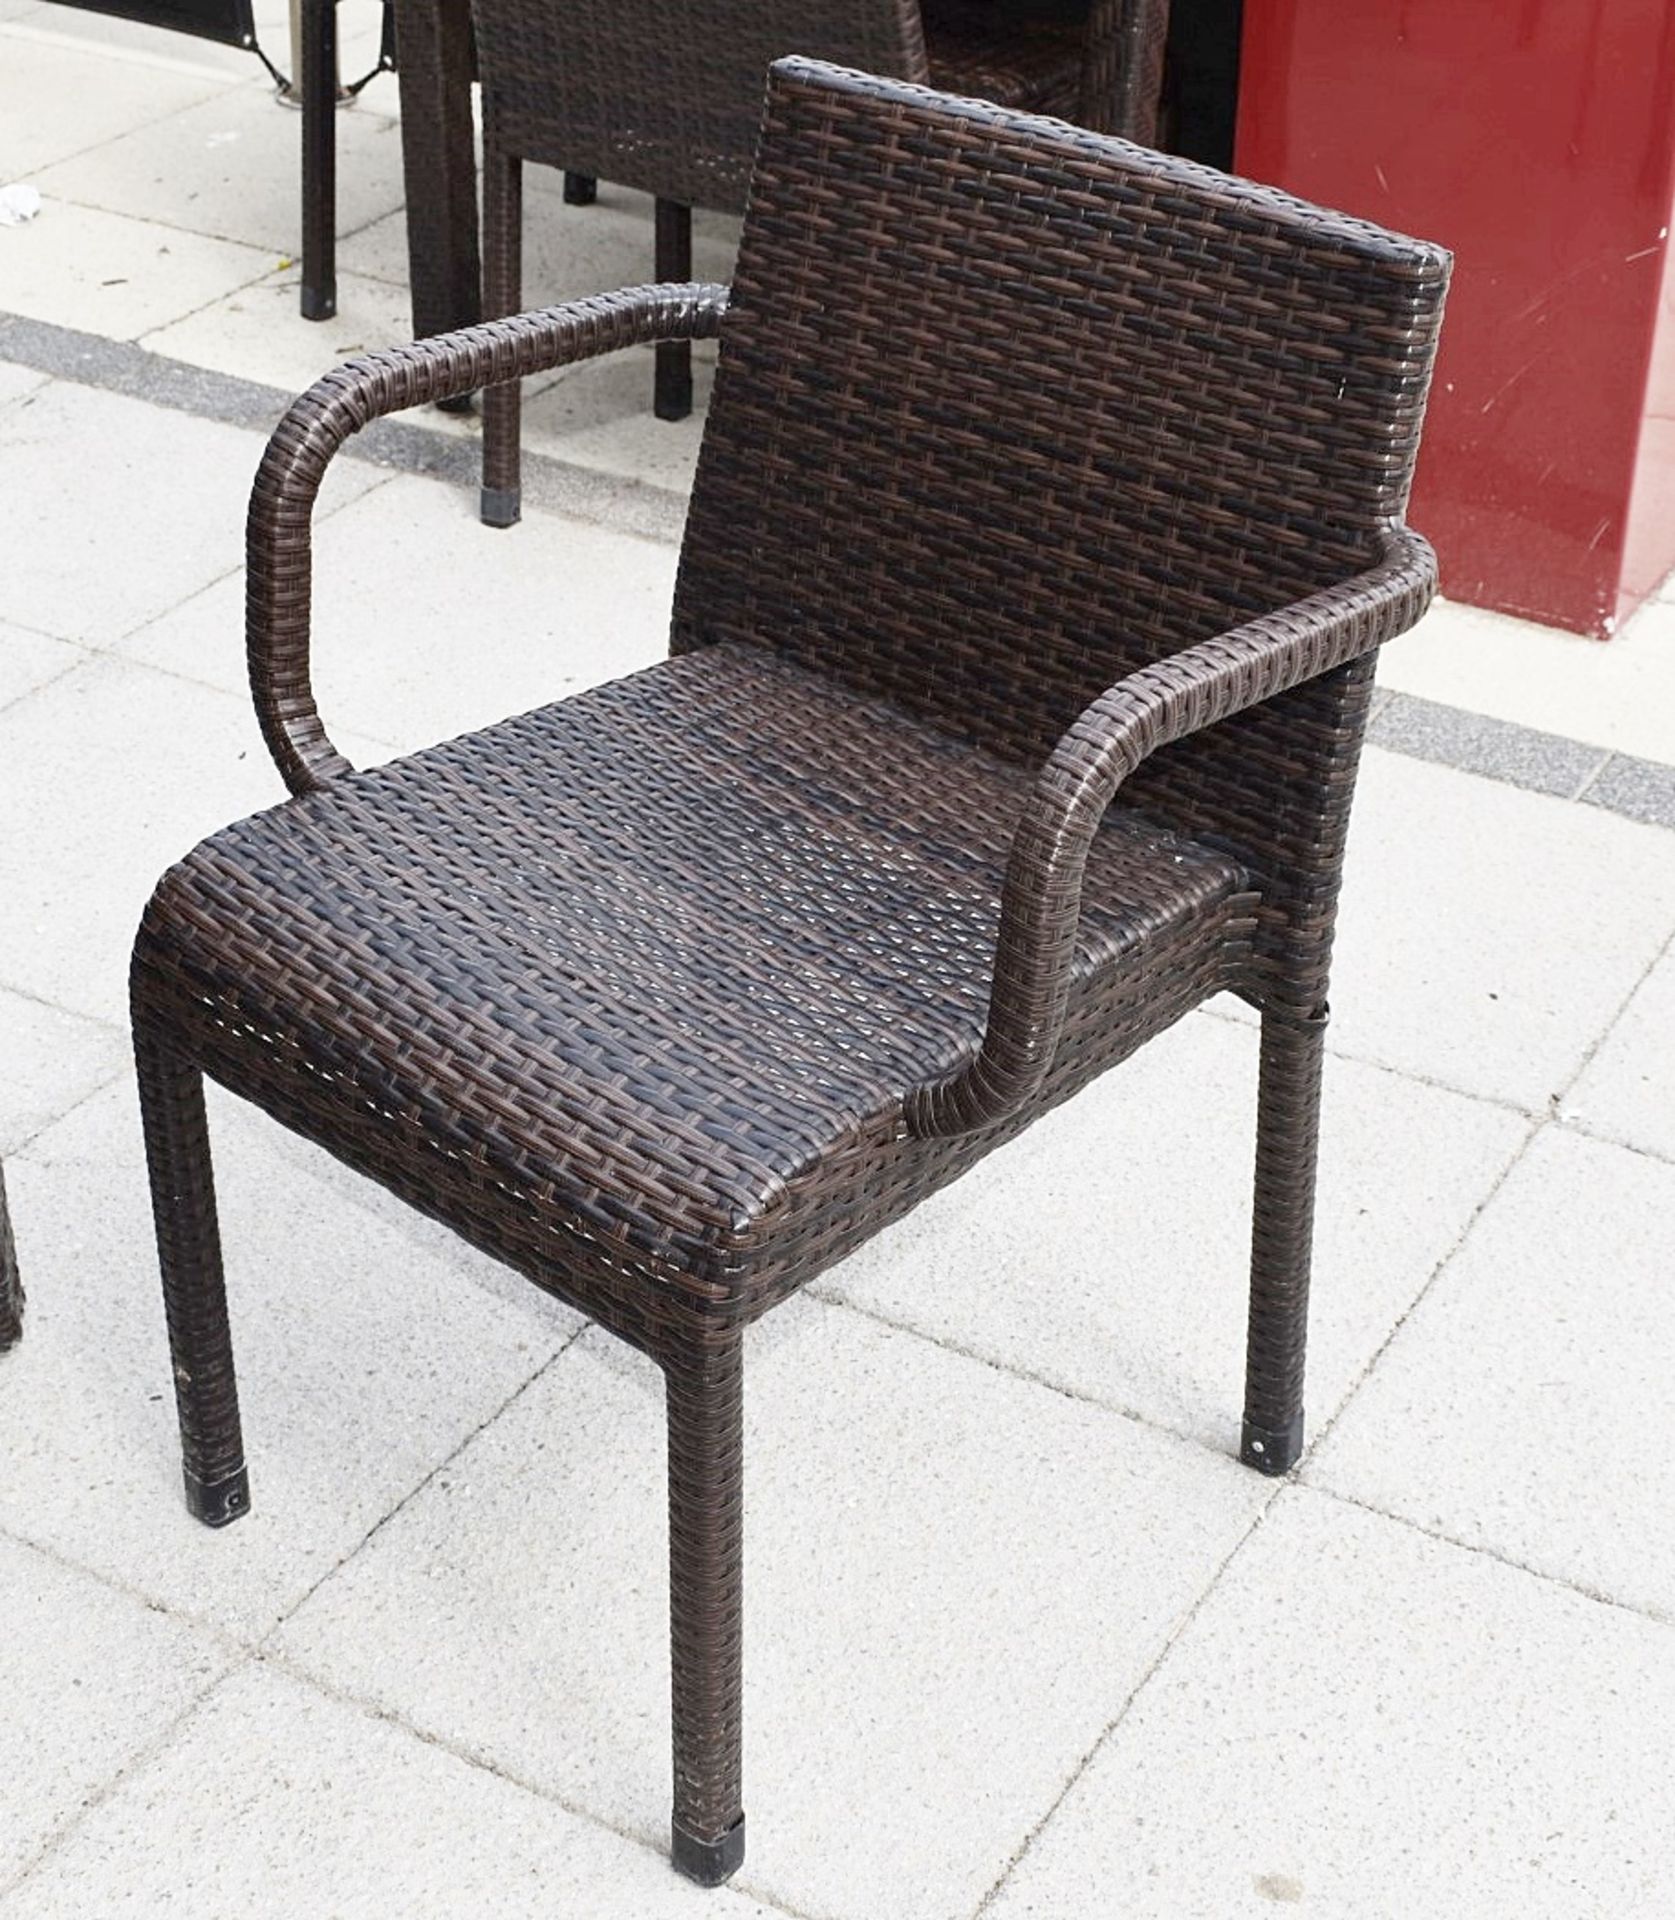 12 x Outdoor Rattan Garden Chairs With 4 Matching Square Tables - Ref: CB OS - CL420 - From a - Image 2 of 4